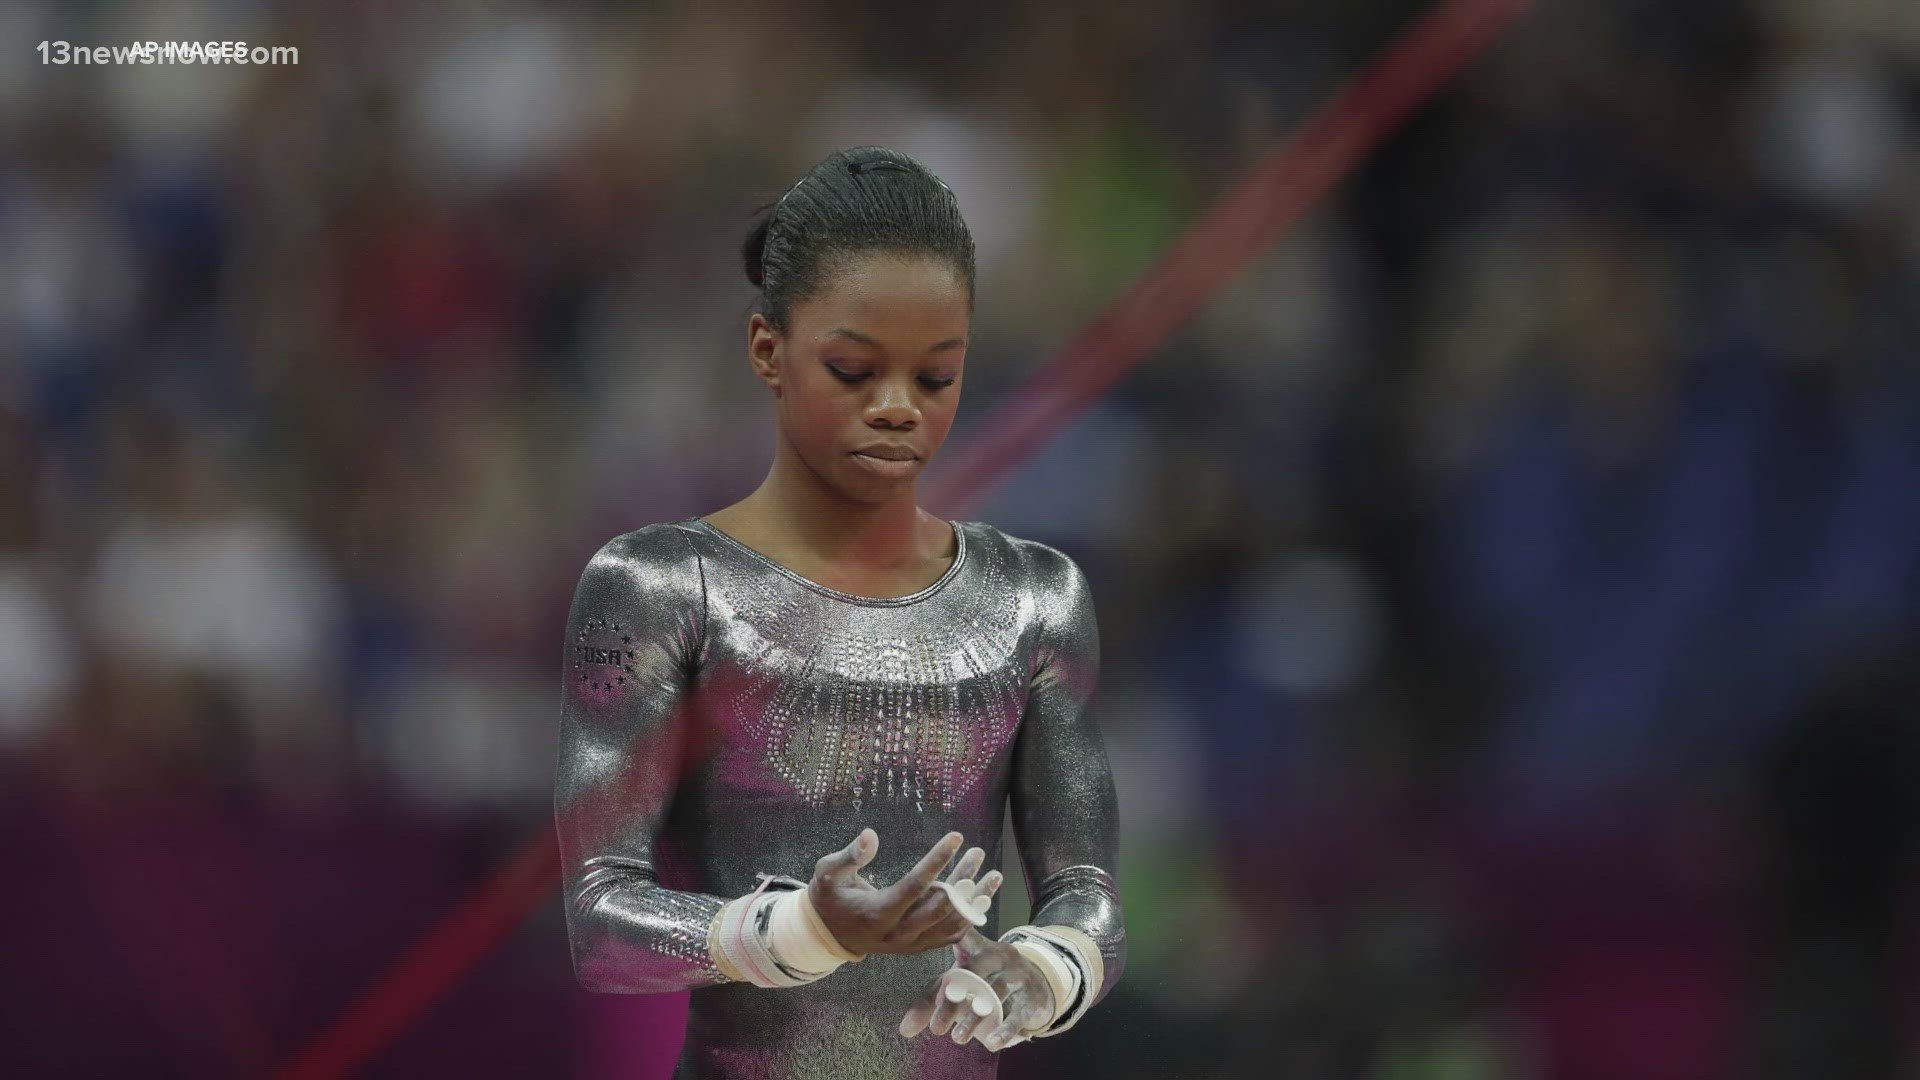 Gabby Douglas resumes training with 2024 Olympics her goal